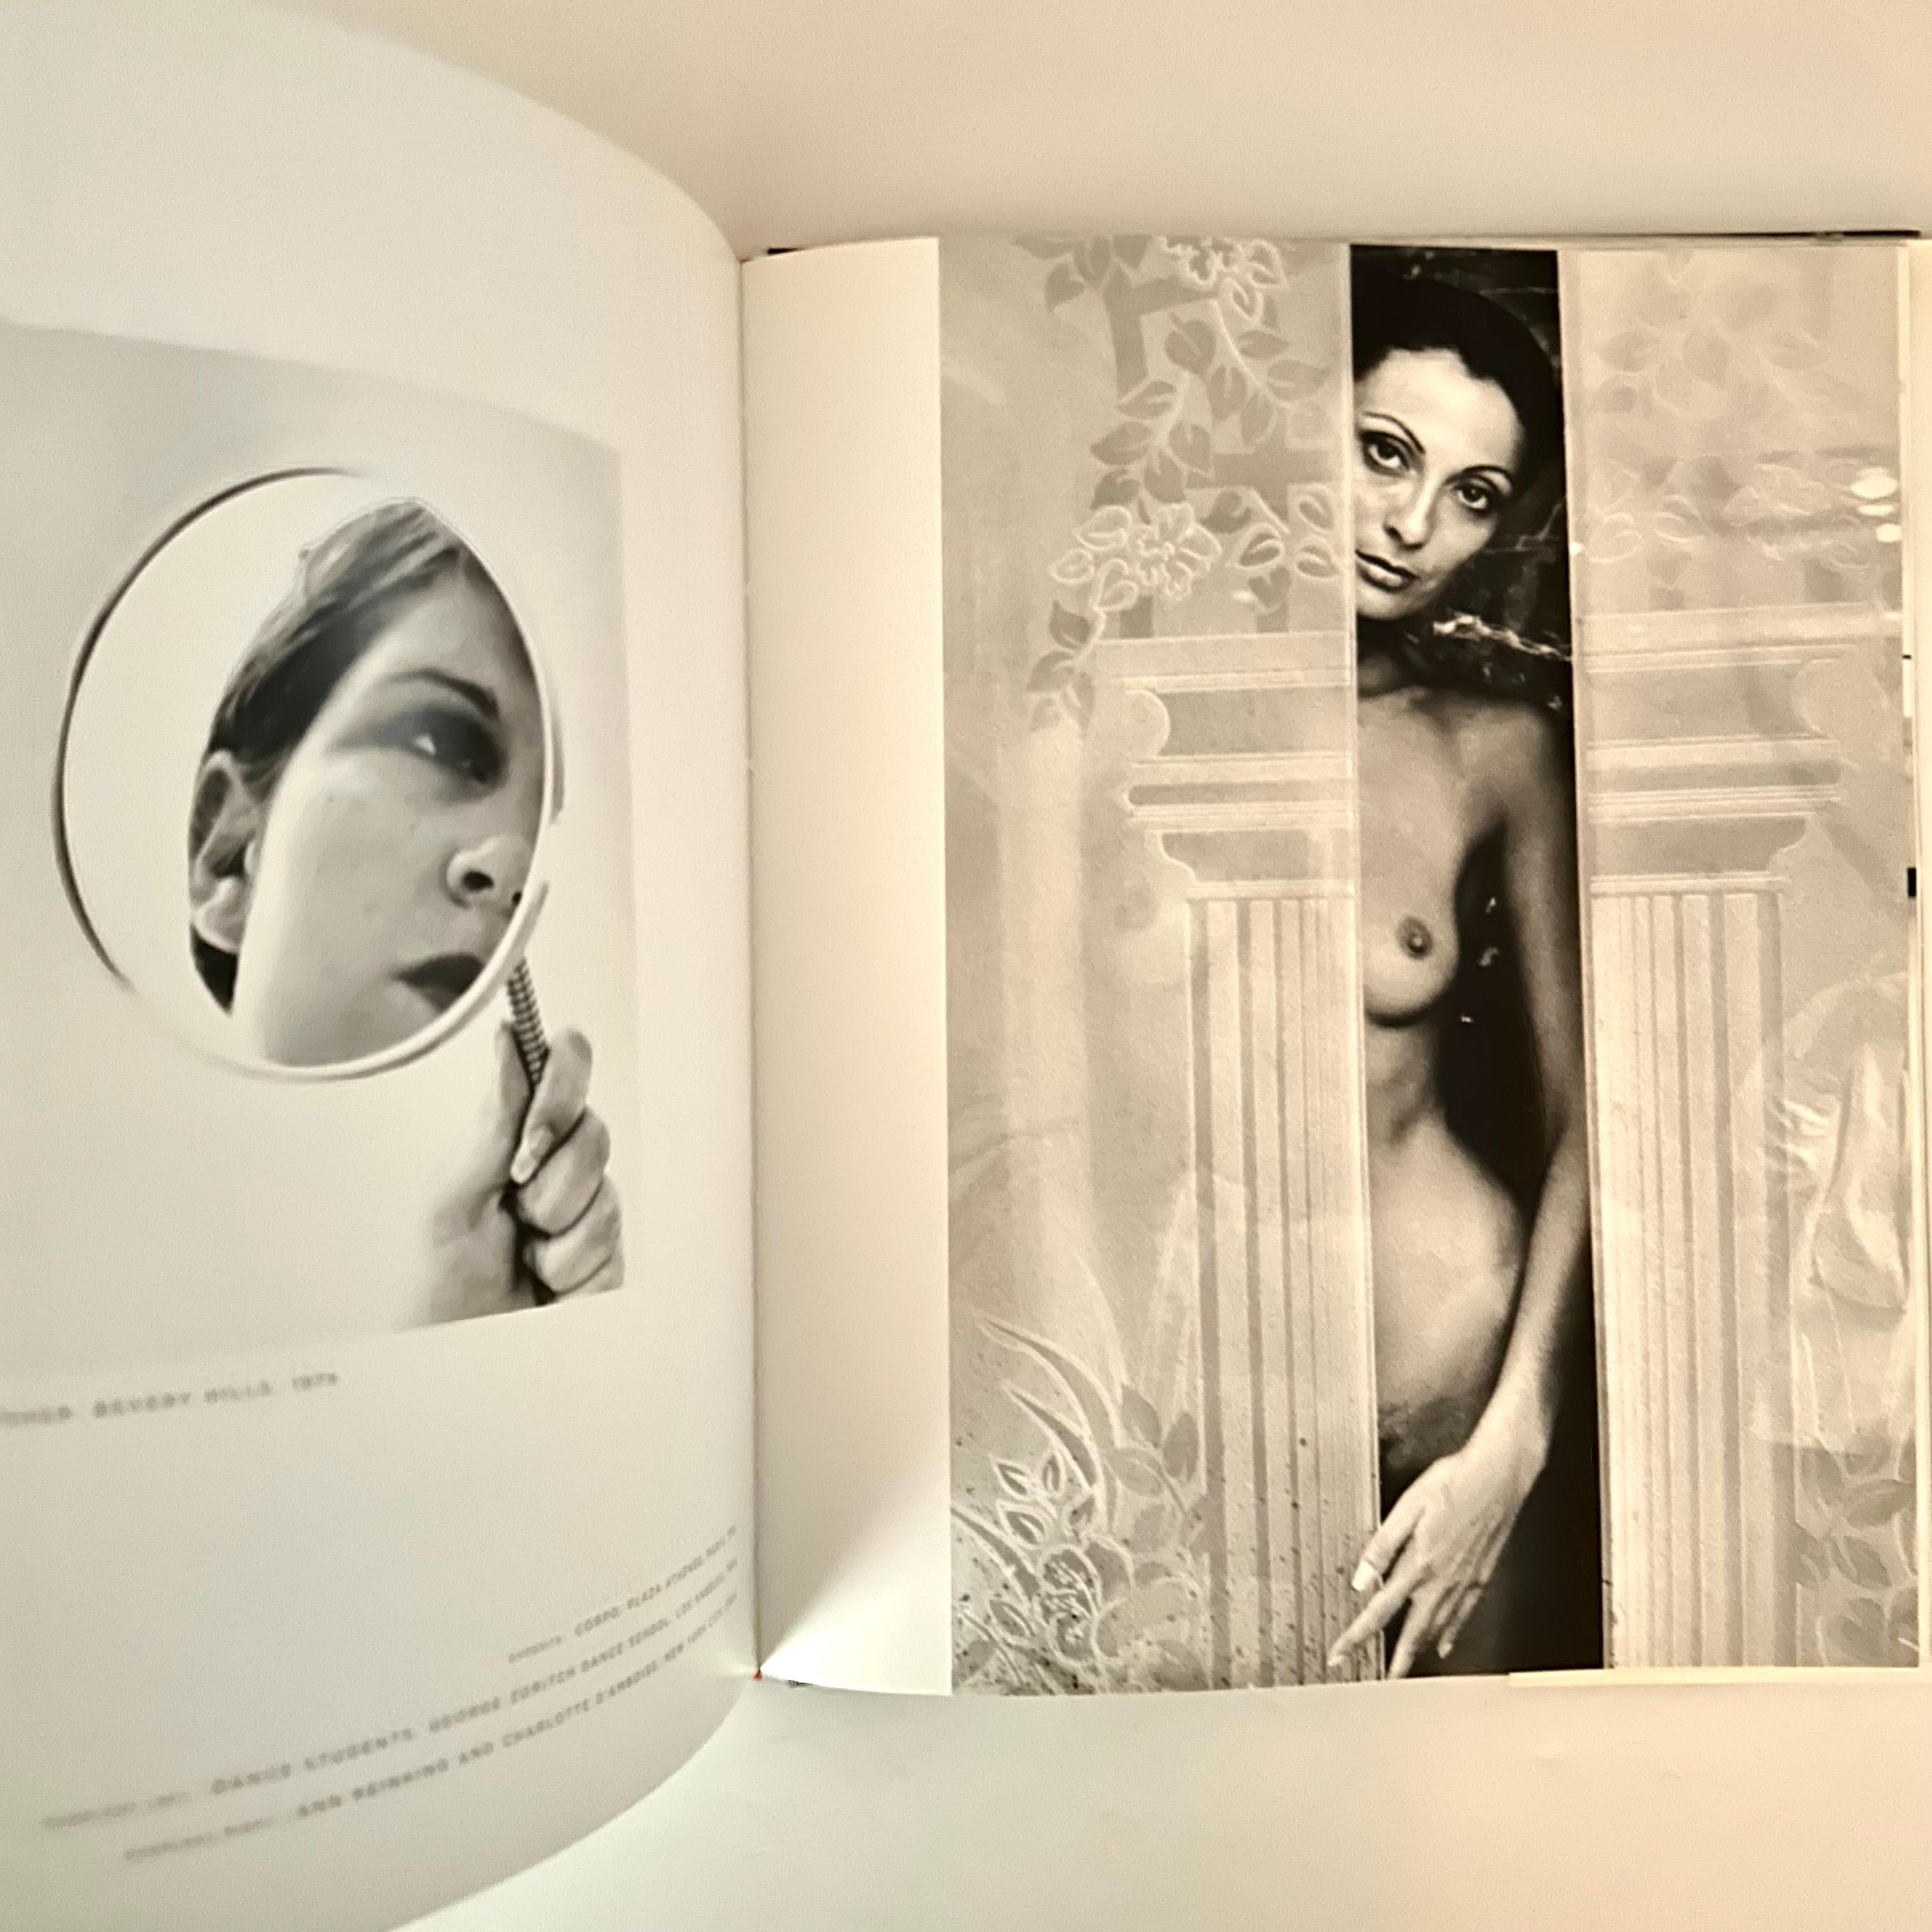 Contemporary The Bad and the Beautiful: Photographs by Ellen Graham - 1st ed., New York, 2004